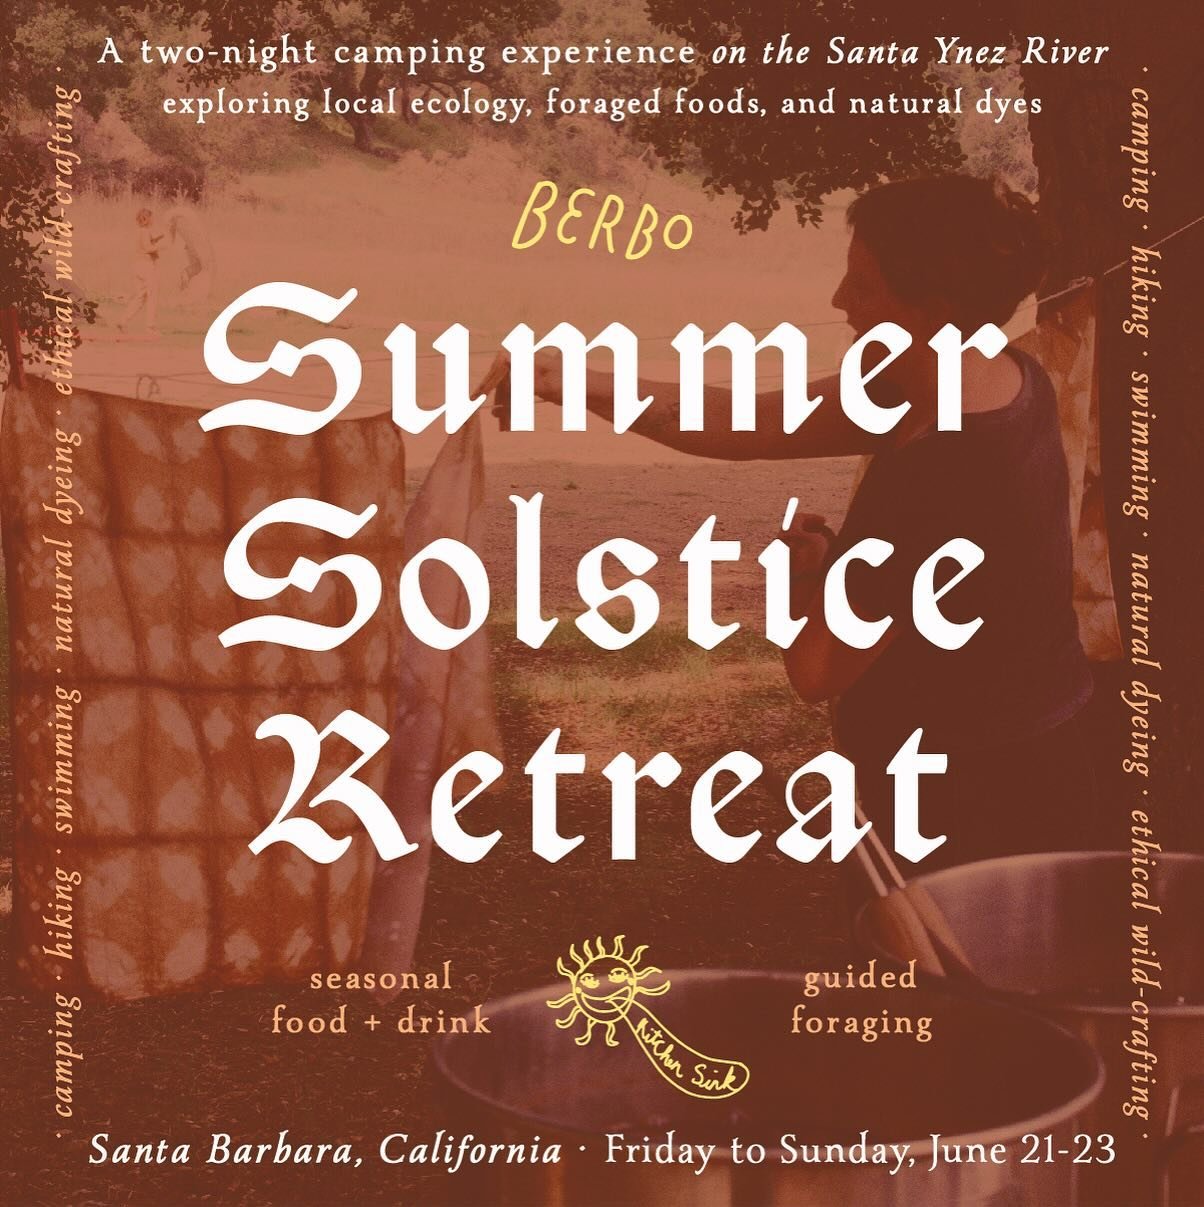 Gather together on the first weekend of summer, June 21-23, to celebrate the solstice with two days and two nights of communal camping, creating, eating, and exploring along the Santa Ynez River in Santa Barbara.

On the solstice, the longest day of 